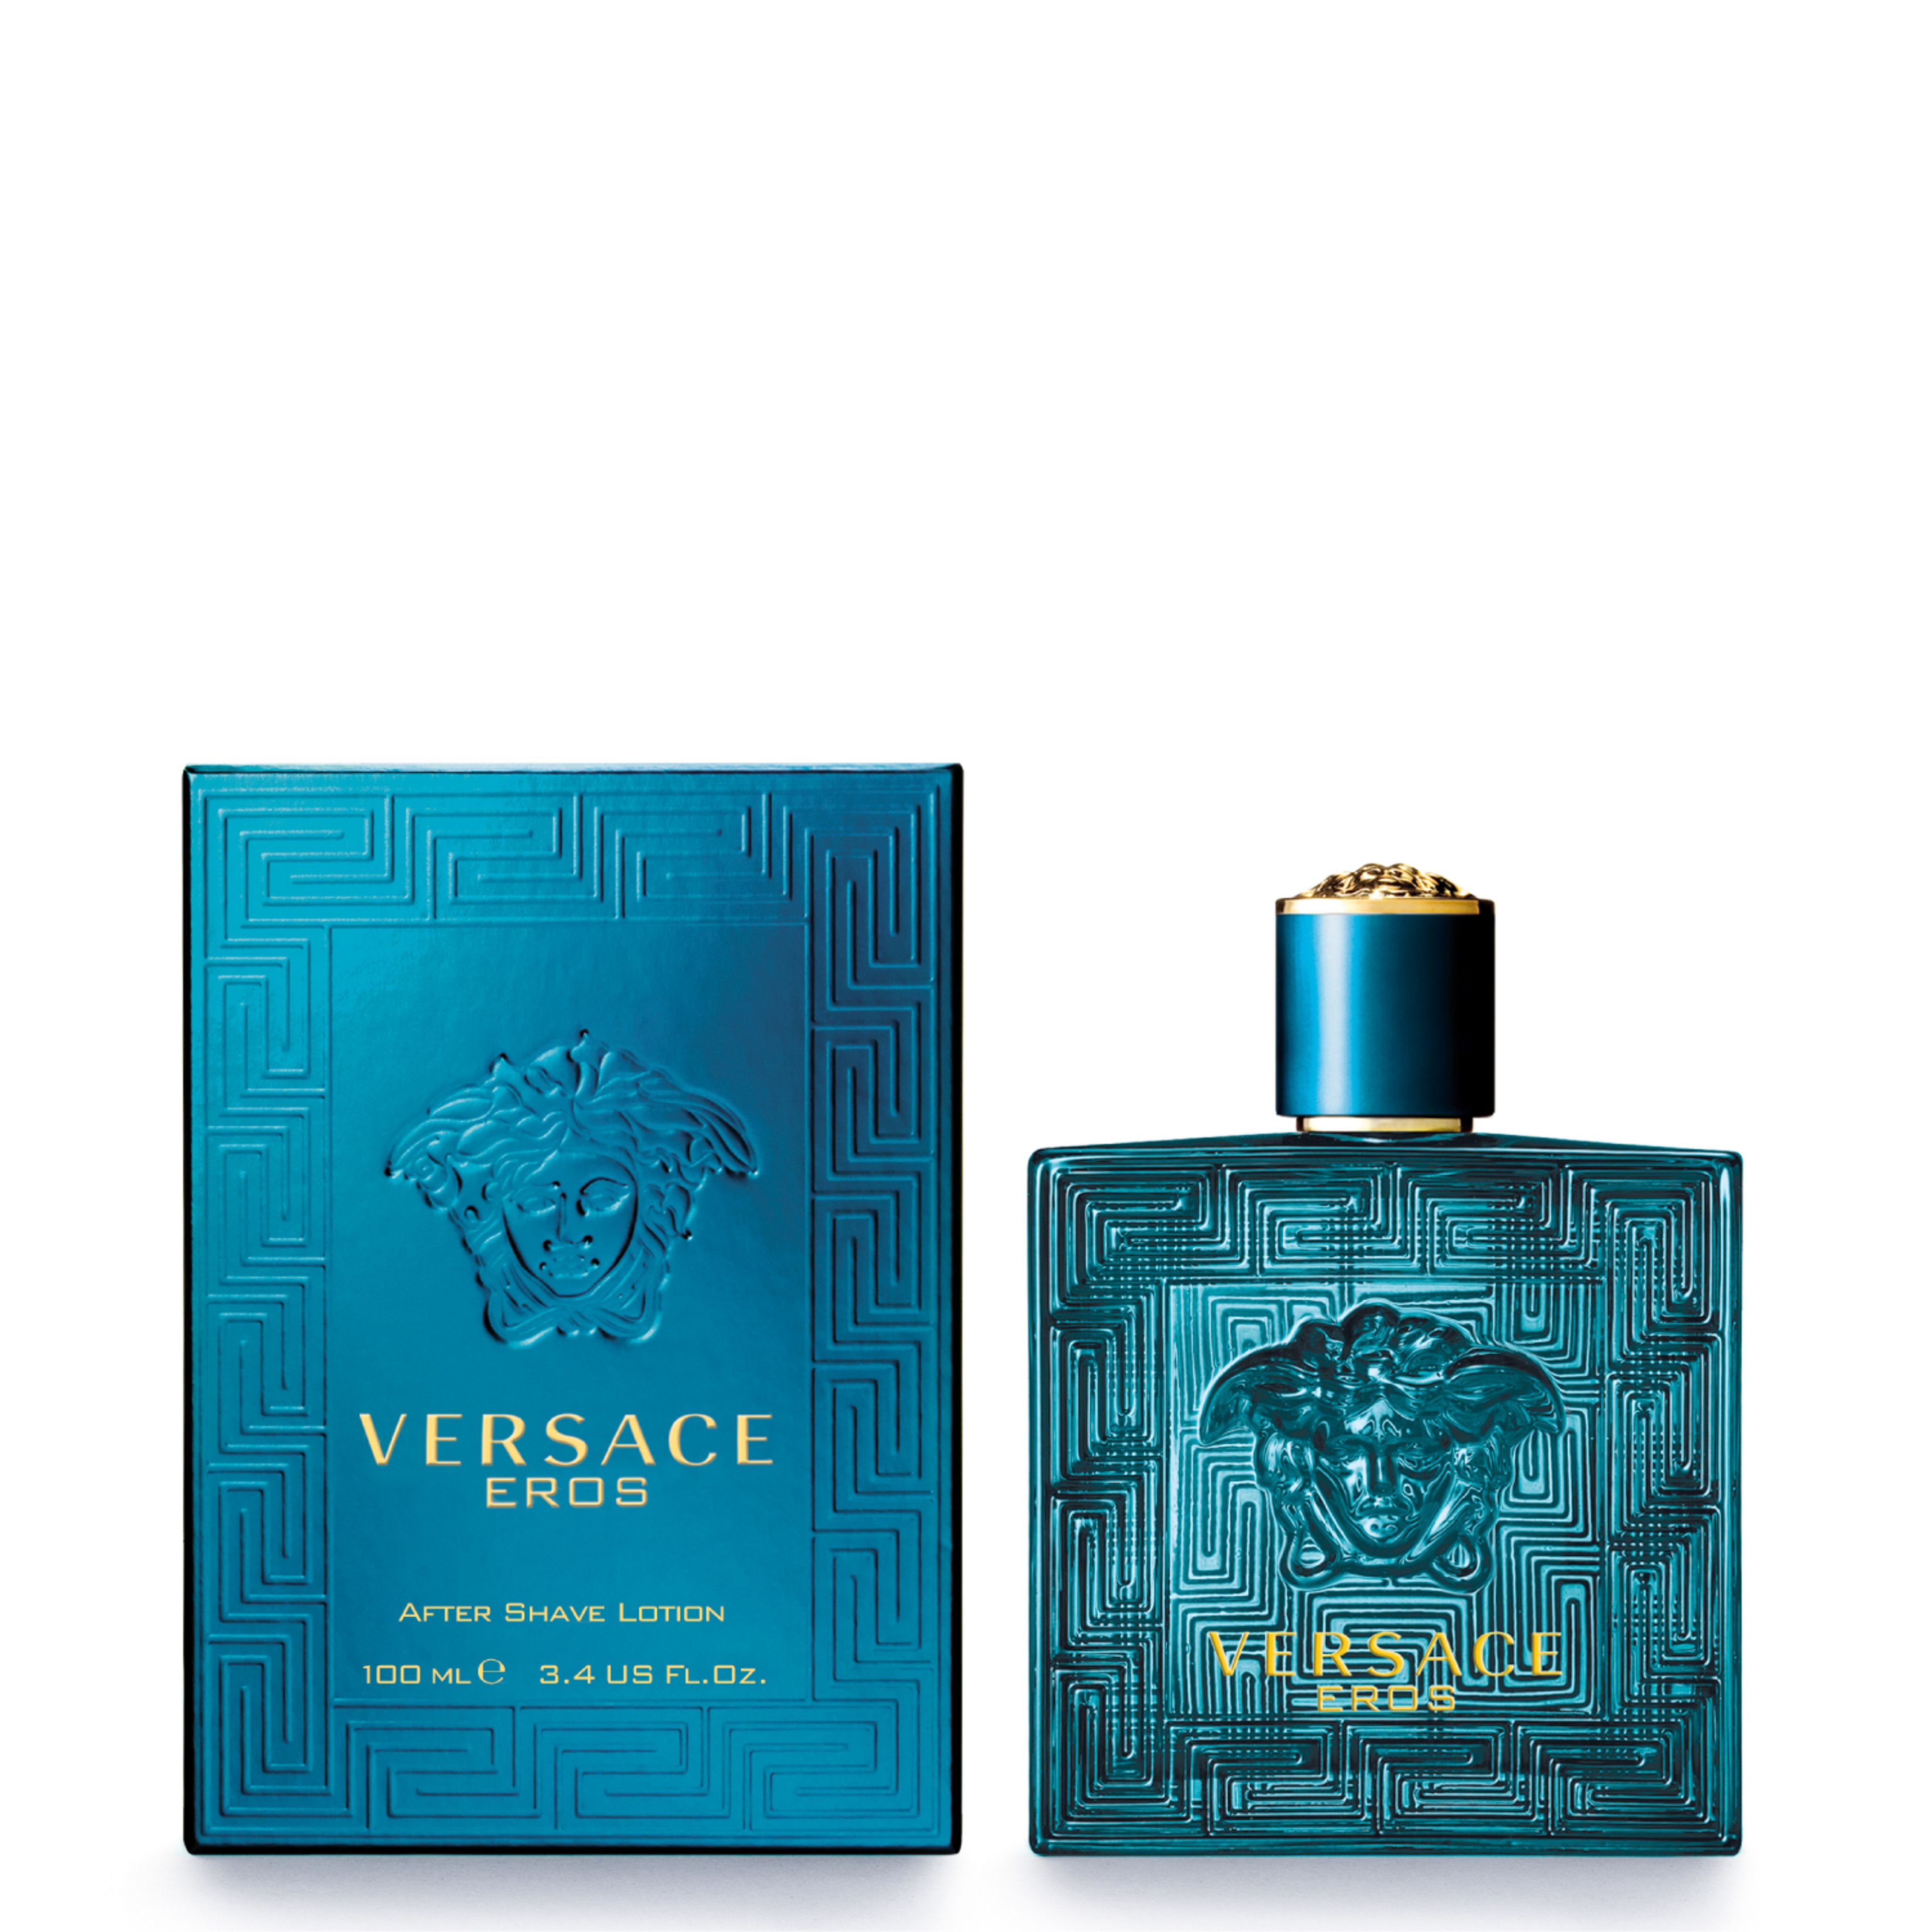 Versace Eros After Shave Lotion 1